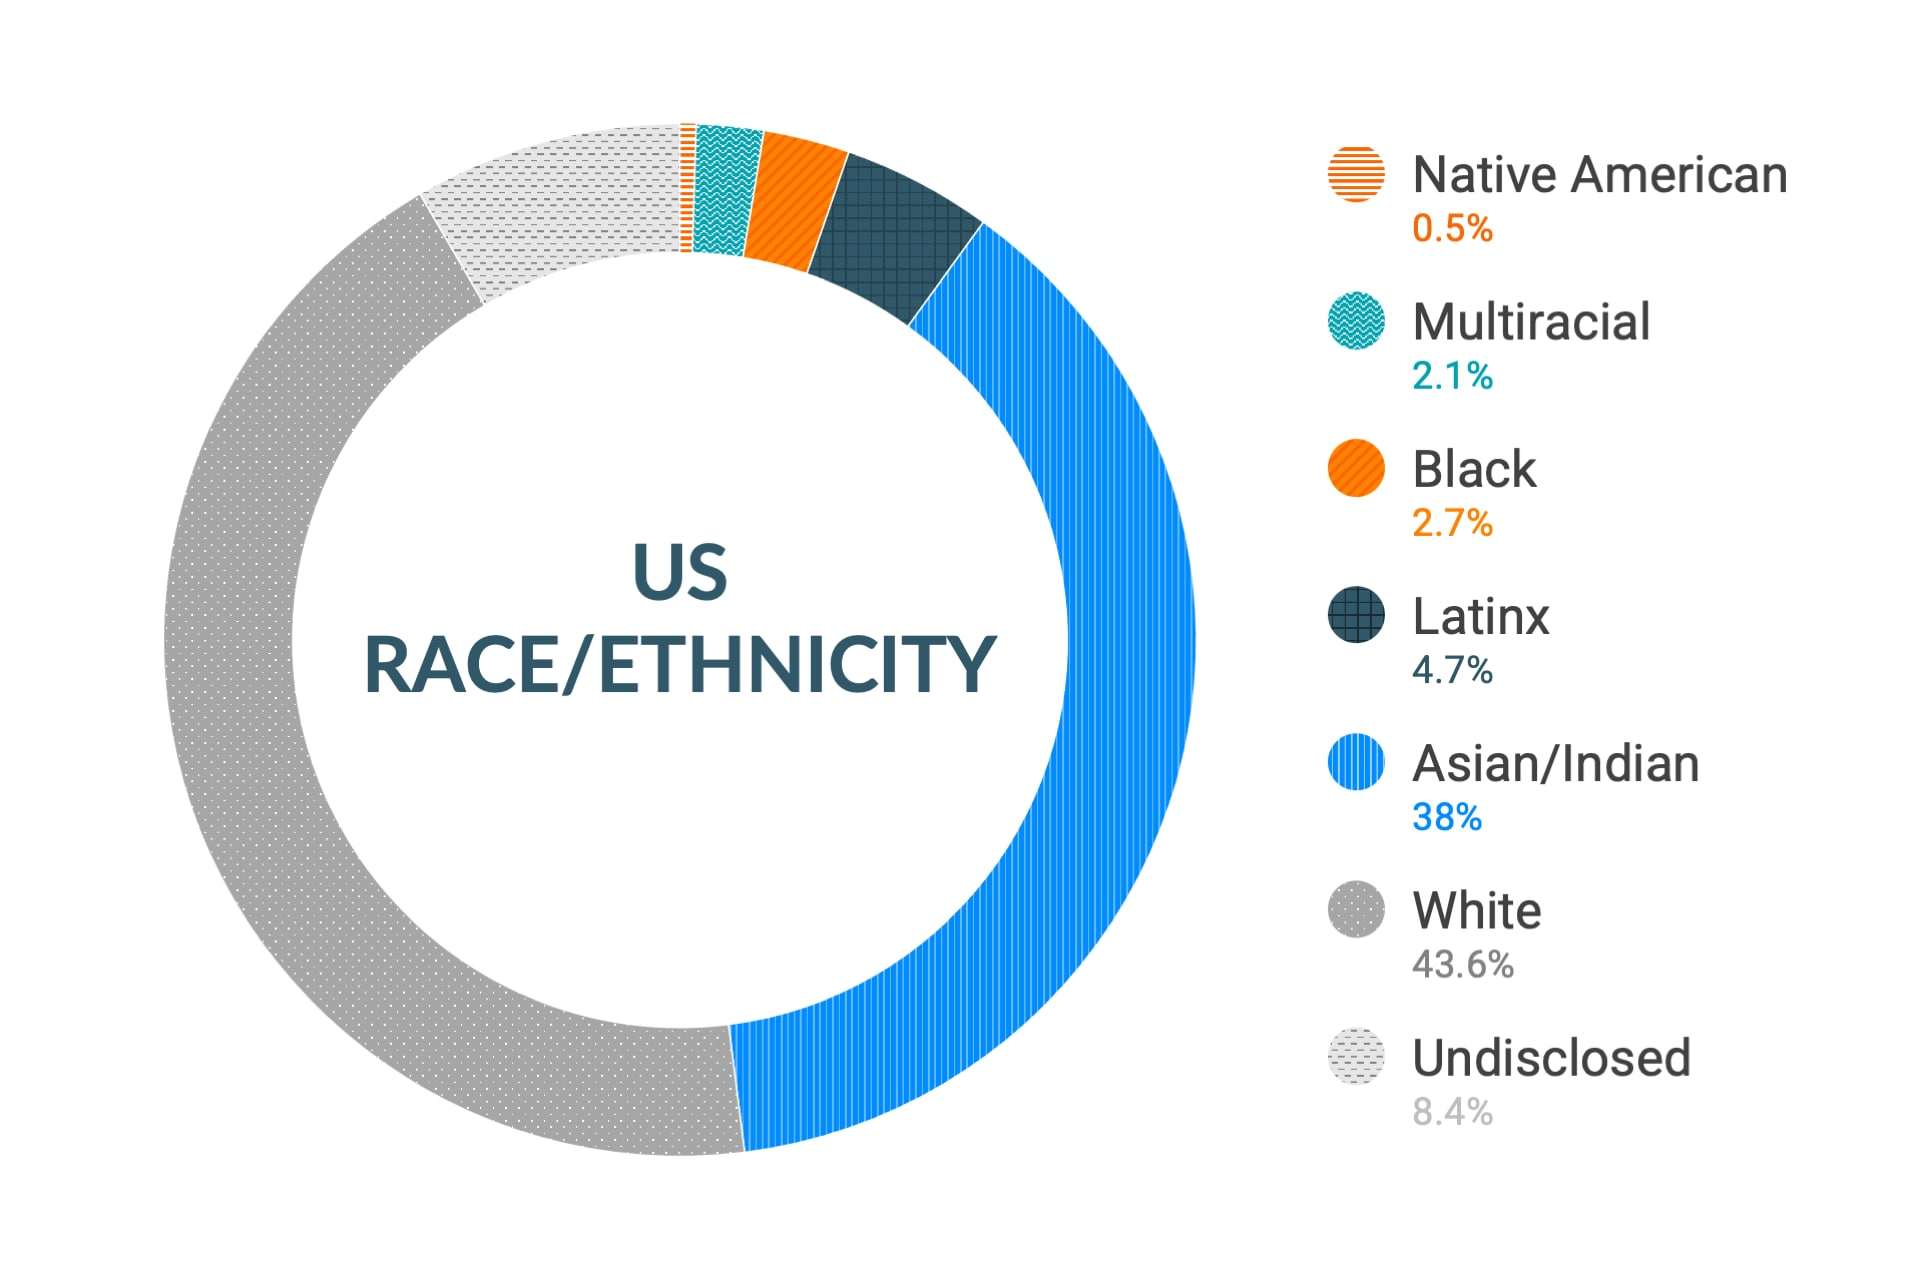 Cloudera Diversity and Inclusion data for U.S. Race and Ethnicity: Native American 0.5%, Multiracial 2.0%, Black 4.0%, Latinx 5.0%, Asian and Indian 35.9%, White 44.9%, Undisclosed 7.7%